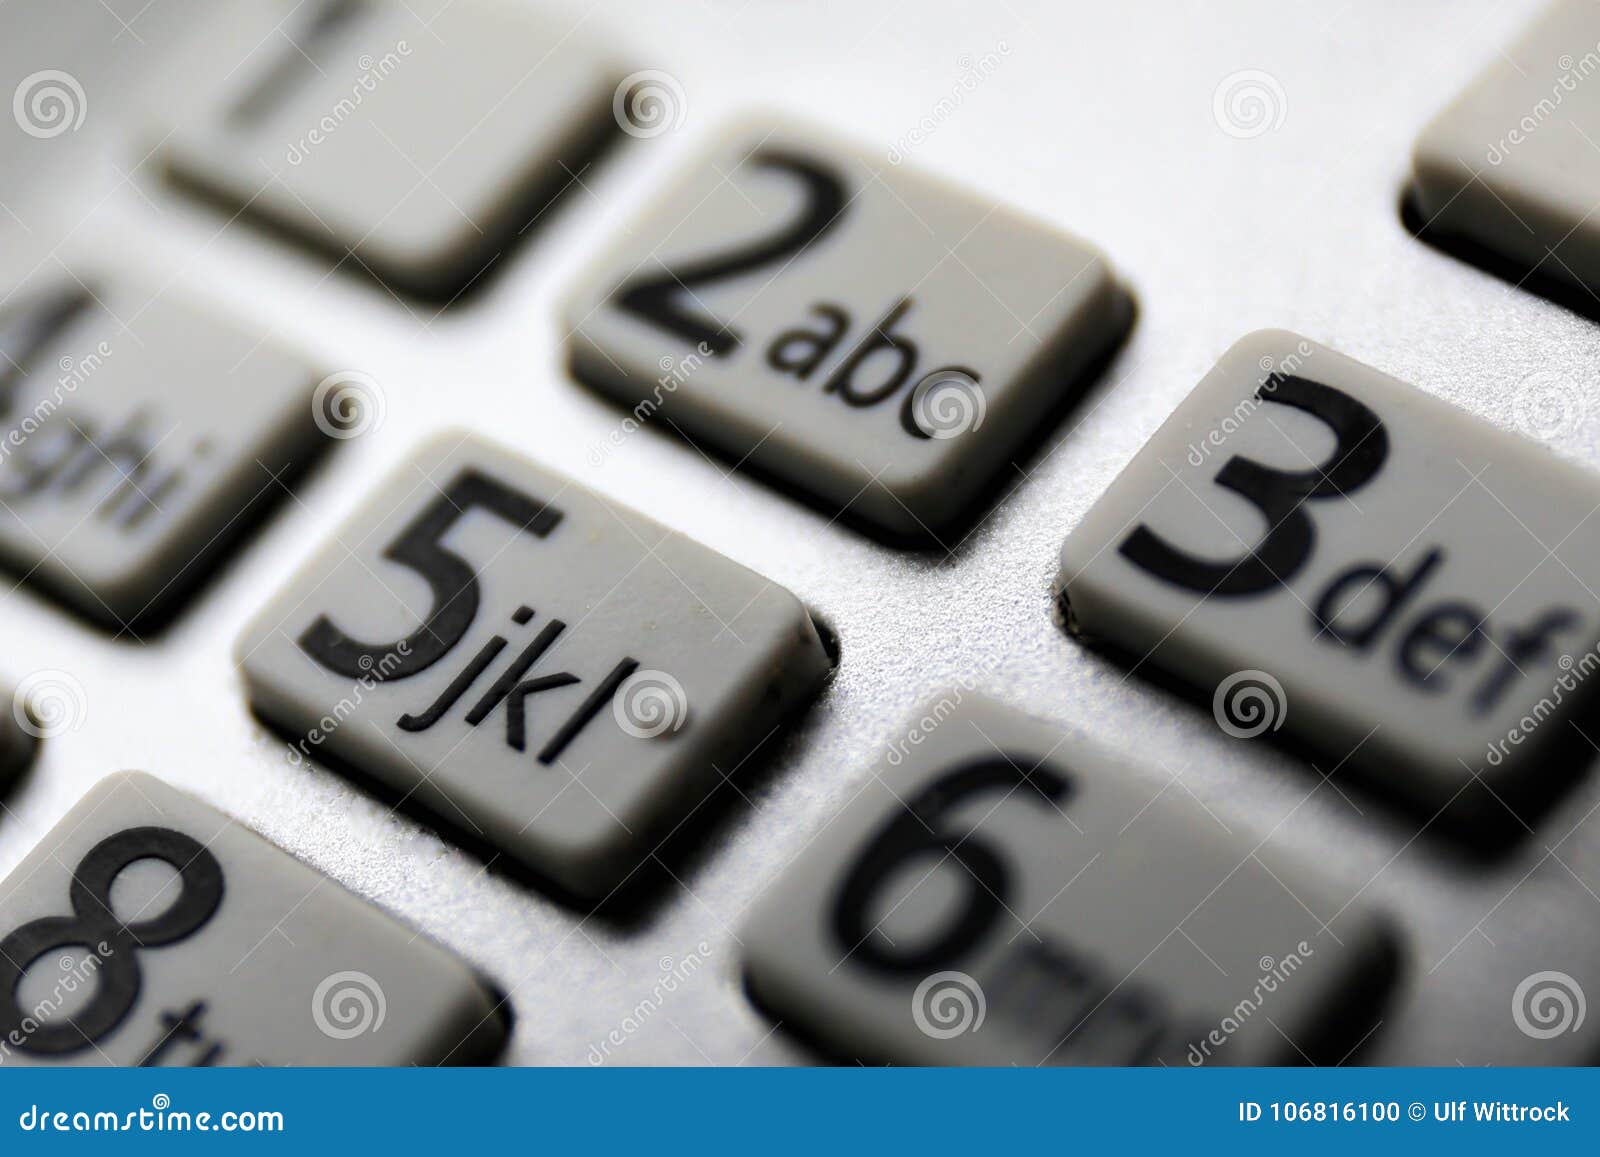 an macro image of a keybord with numbers